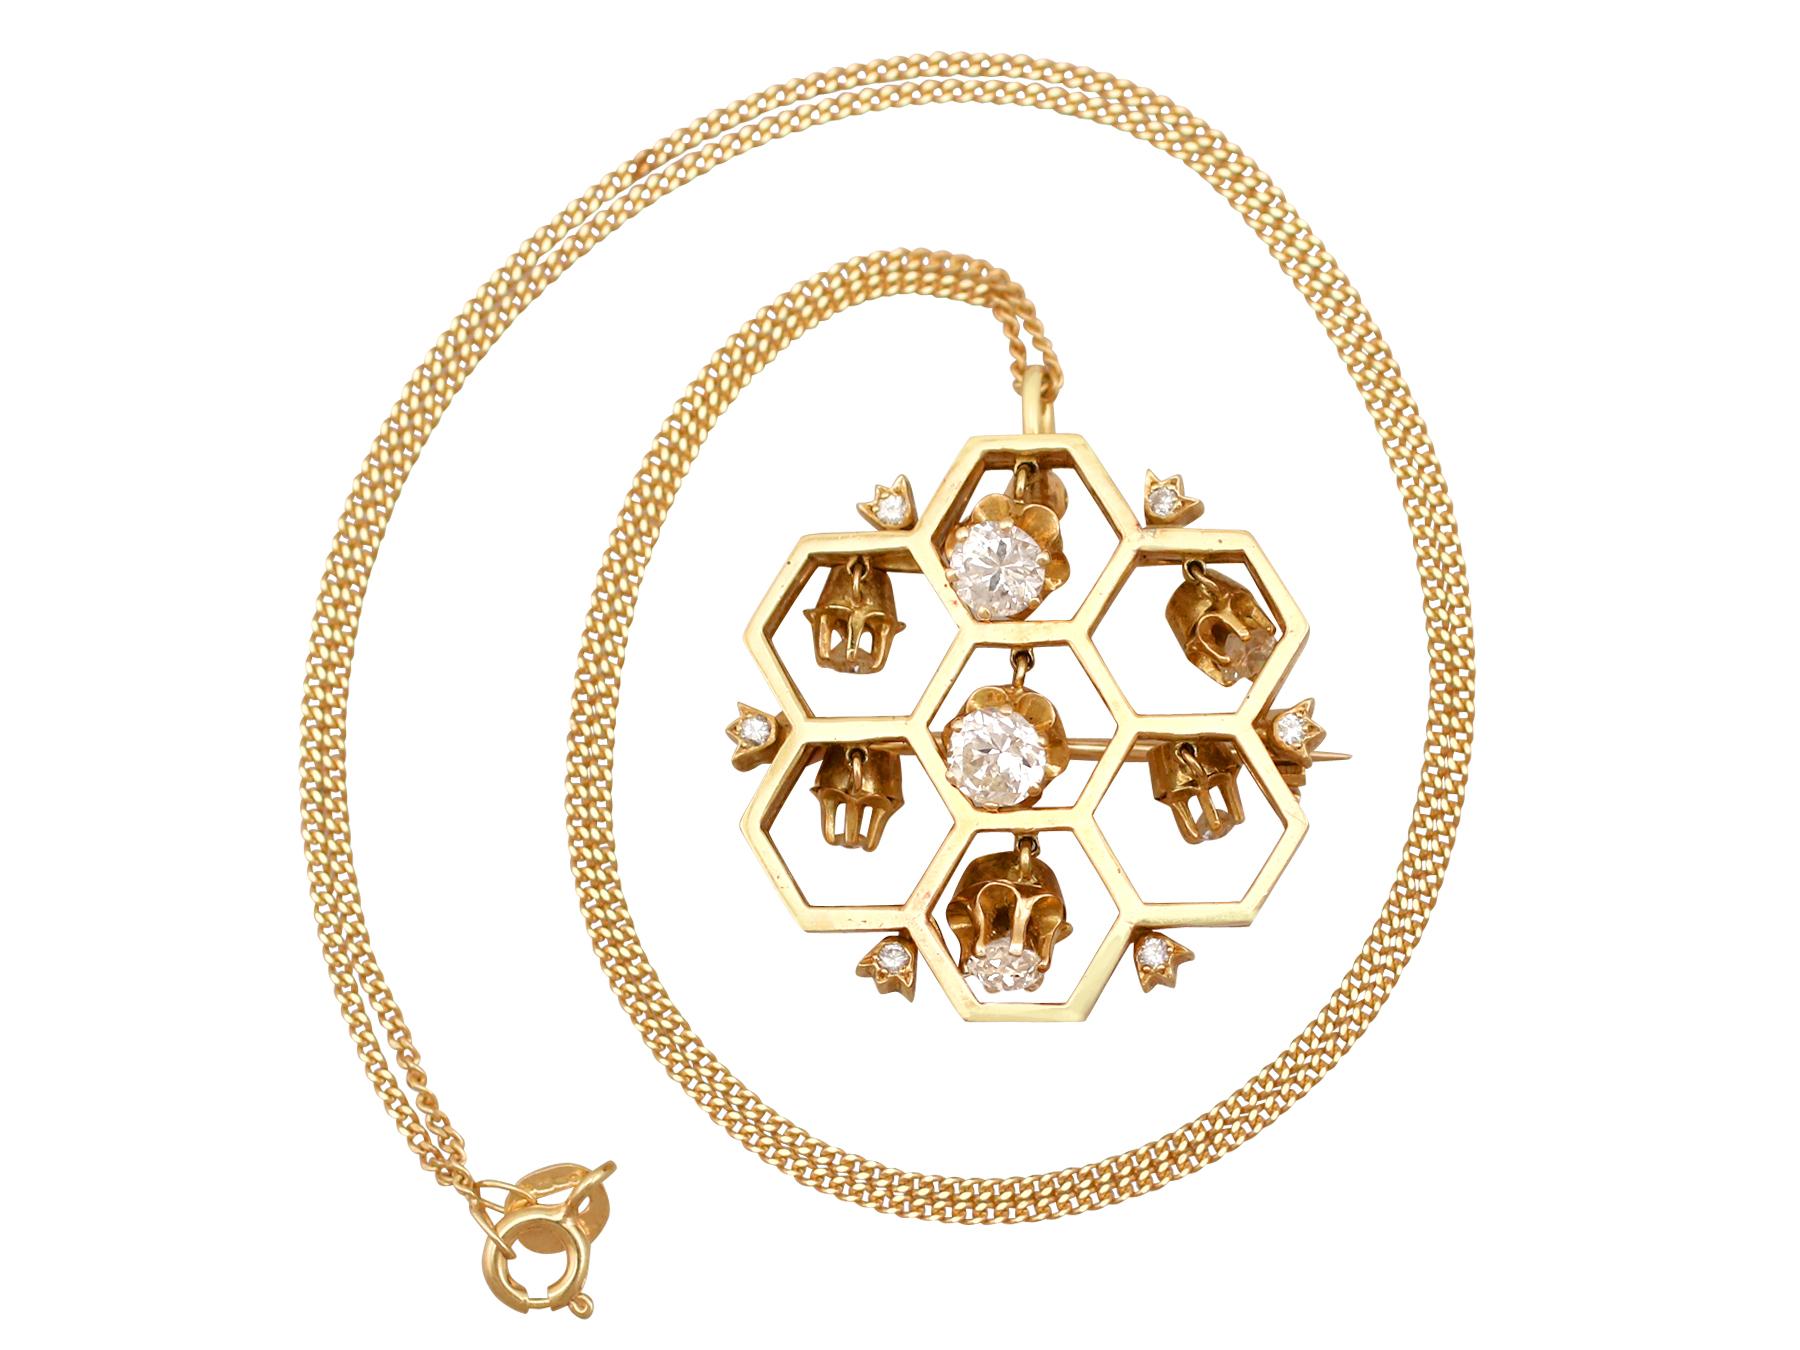 A stunning, fine and impressive 1.29 carat diamond and 18 karat yellow gold pendant/brooch; part of our diverse antique and vintage jewellery/estate jewelry collections.

This stunning, fine and impressive honeycomb diamond pendant has been crafted